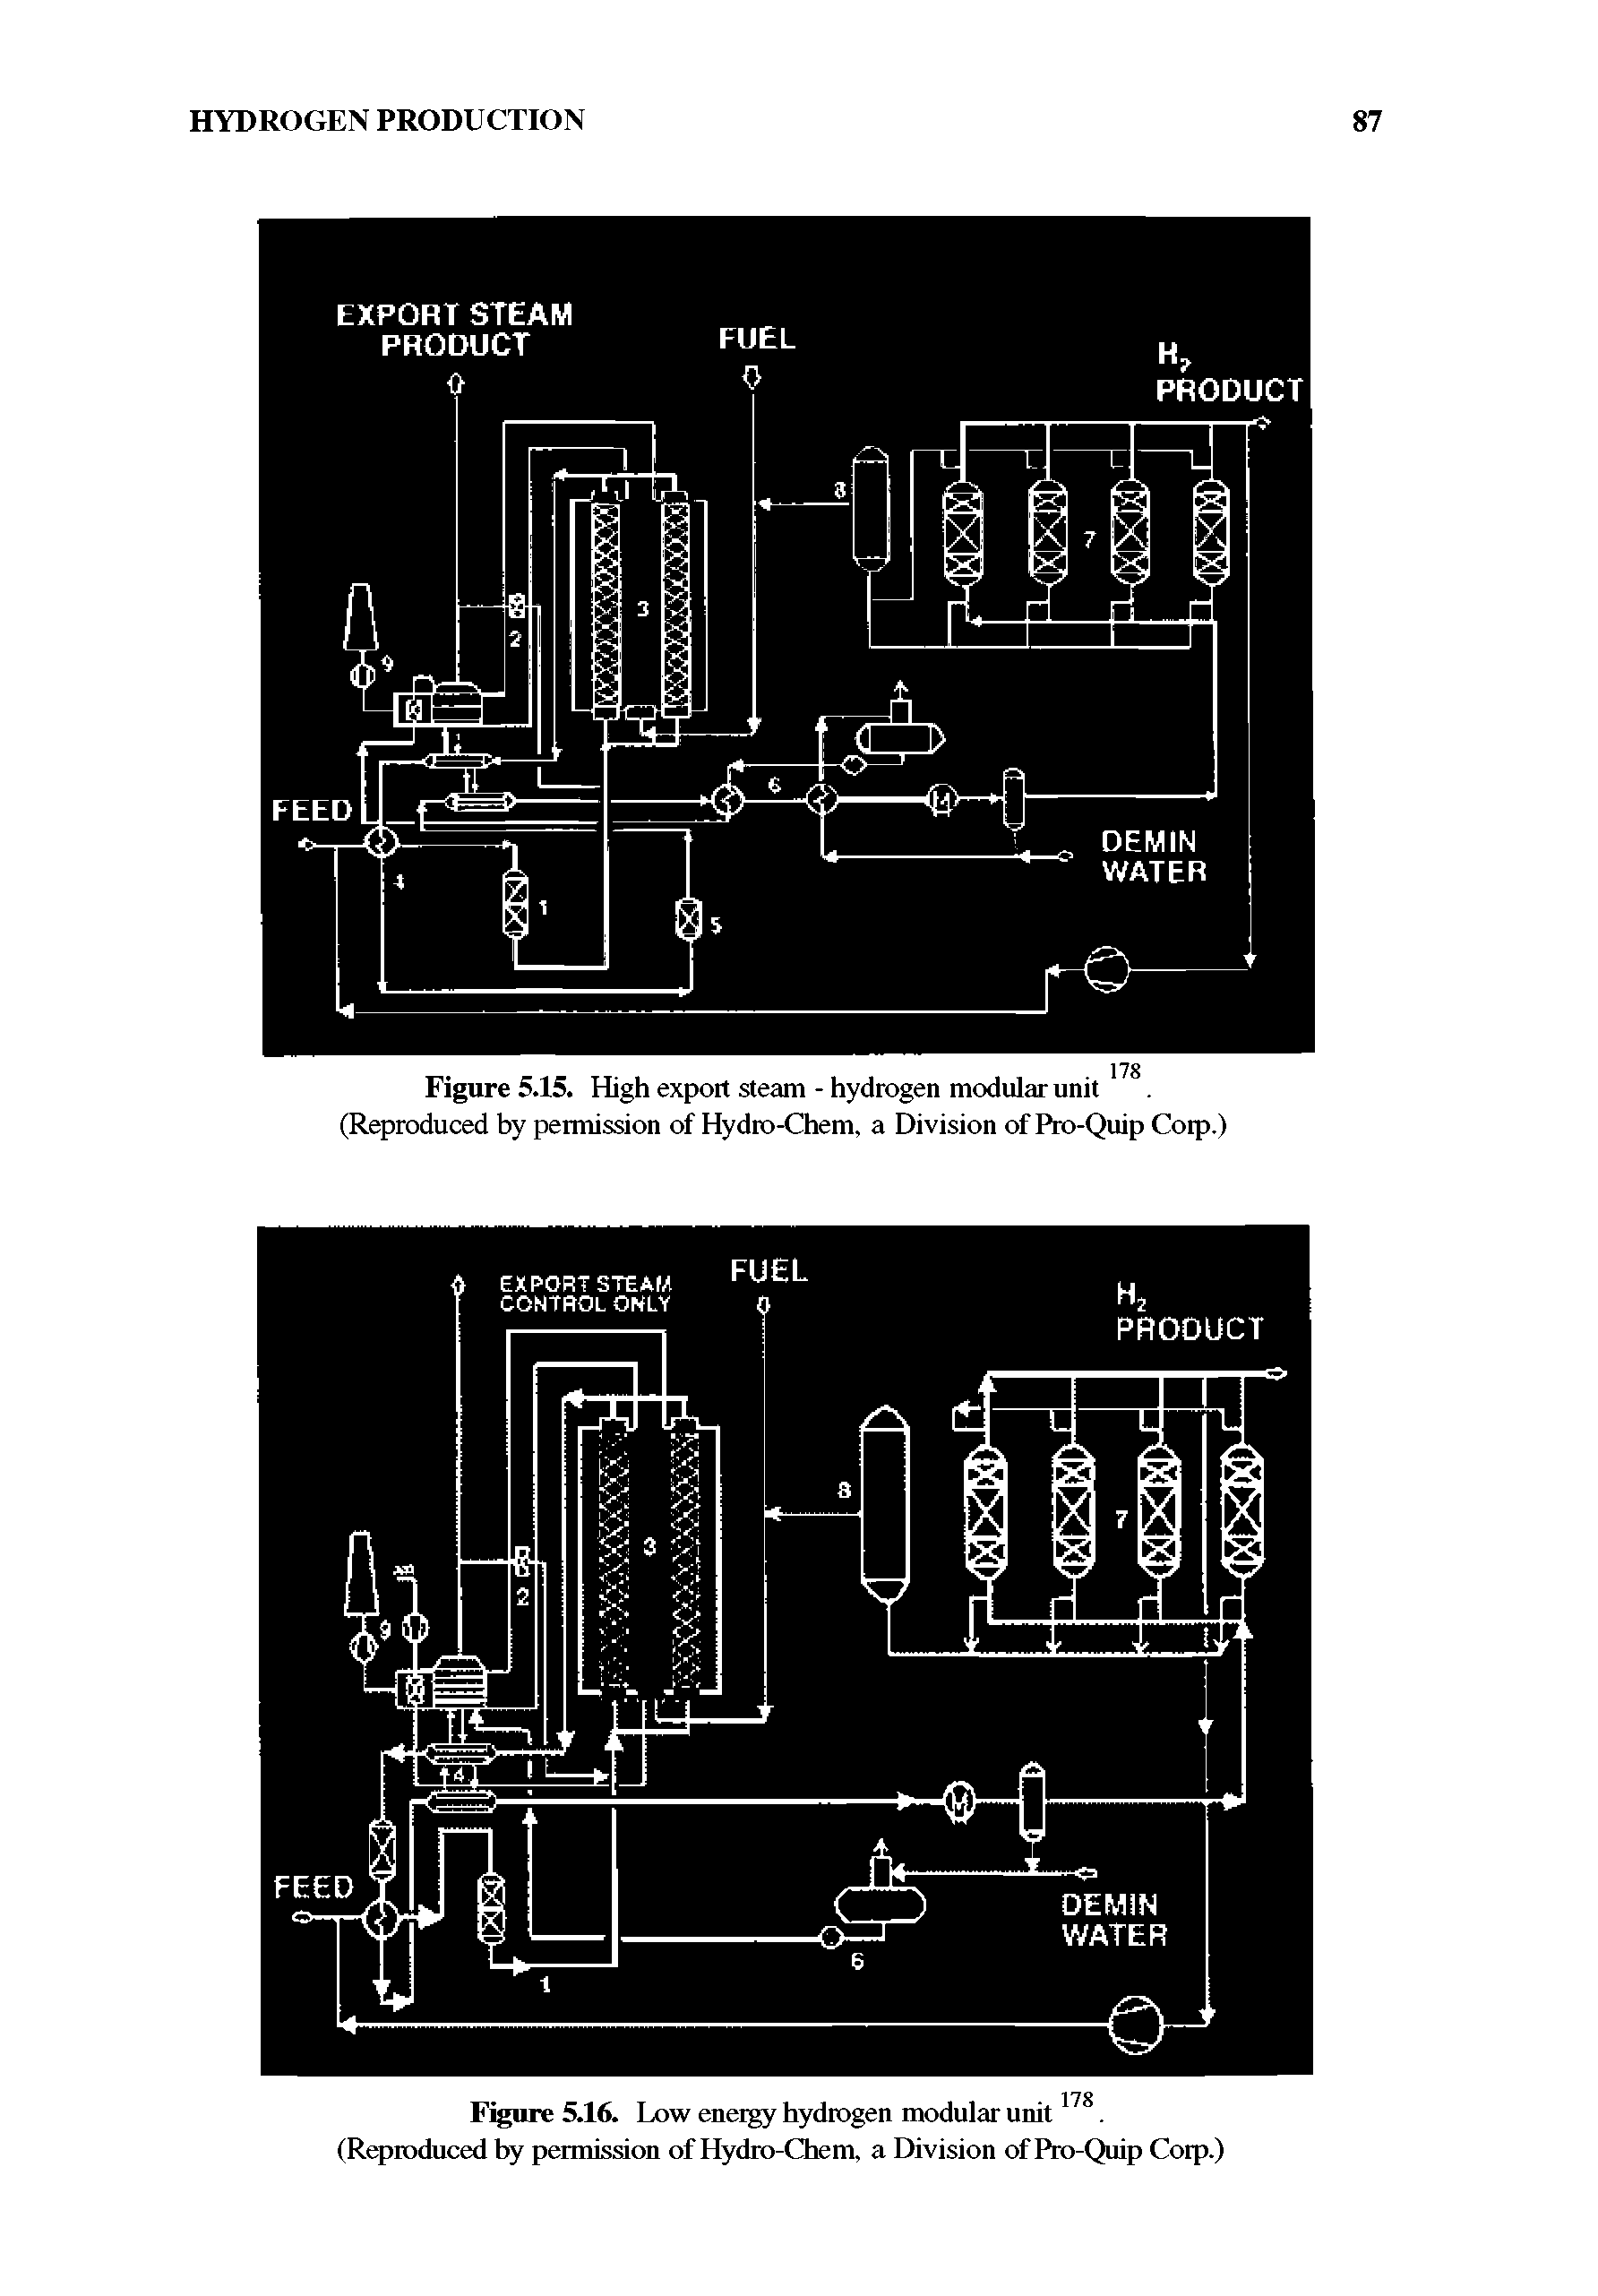 Figure 5.15. High export steam - hydrogen modular unit (Reproduced by permission of Hydro-Chem, a Division of Pro-Quip Corp.)...